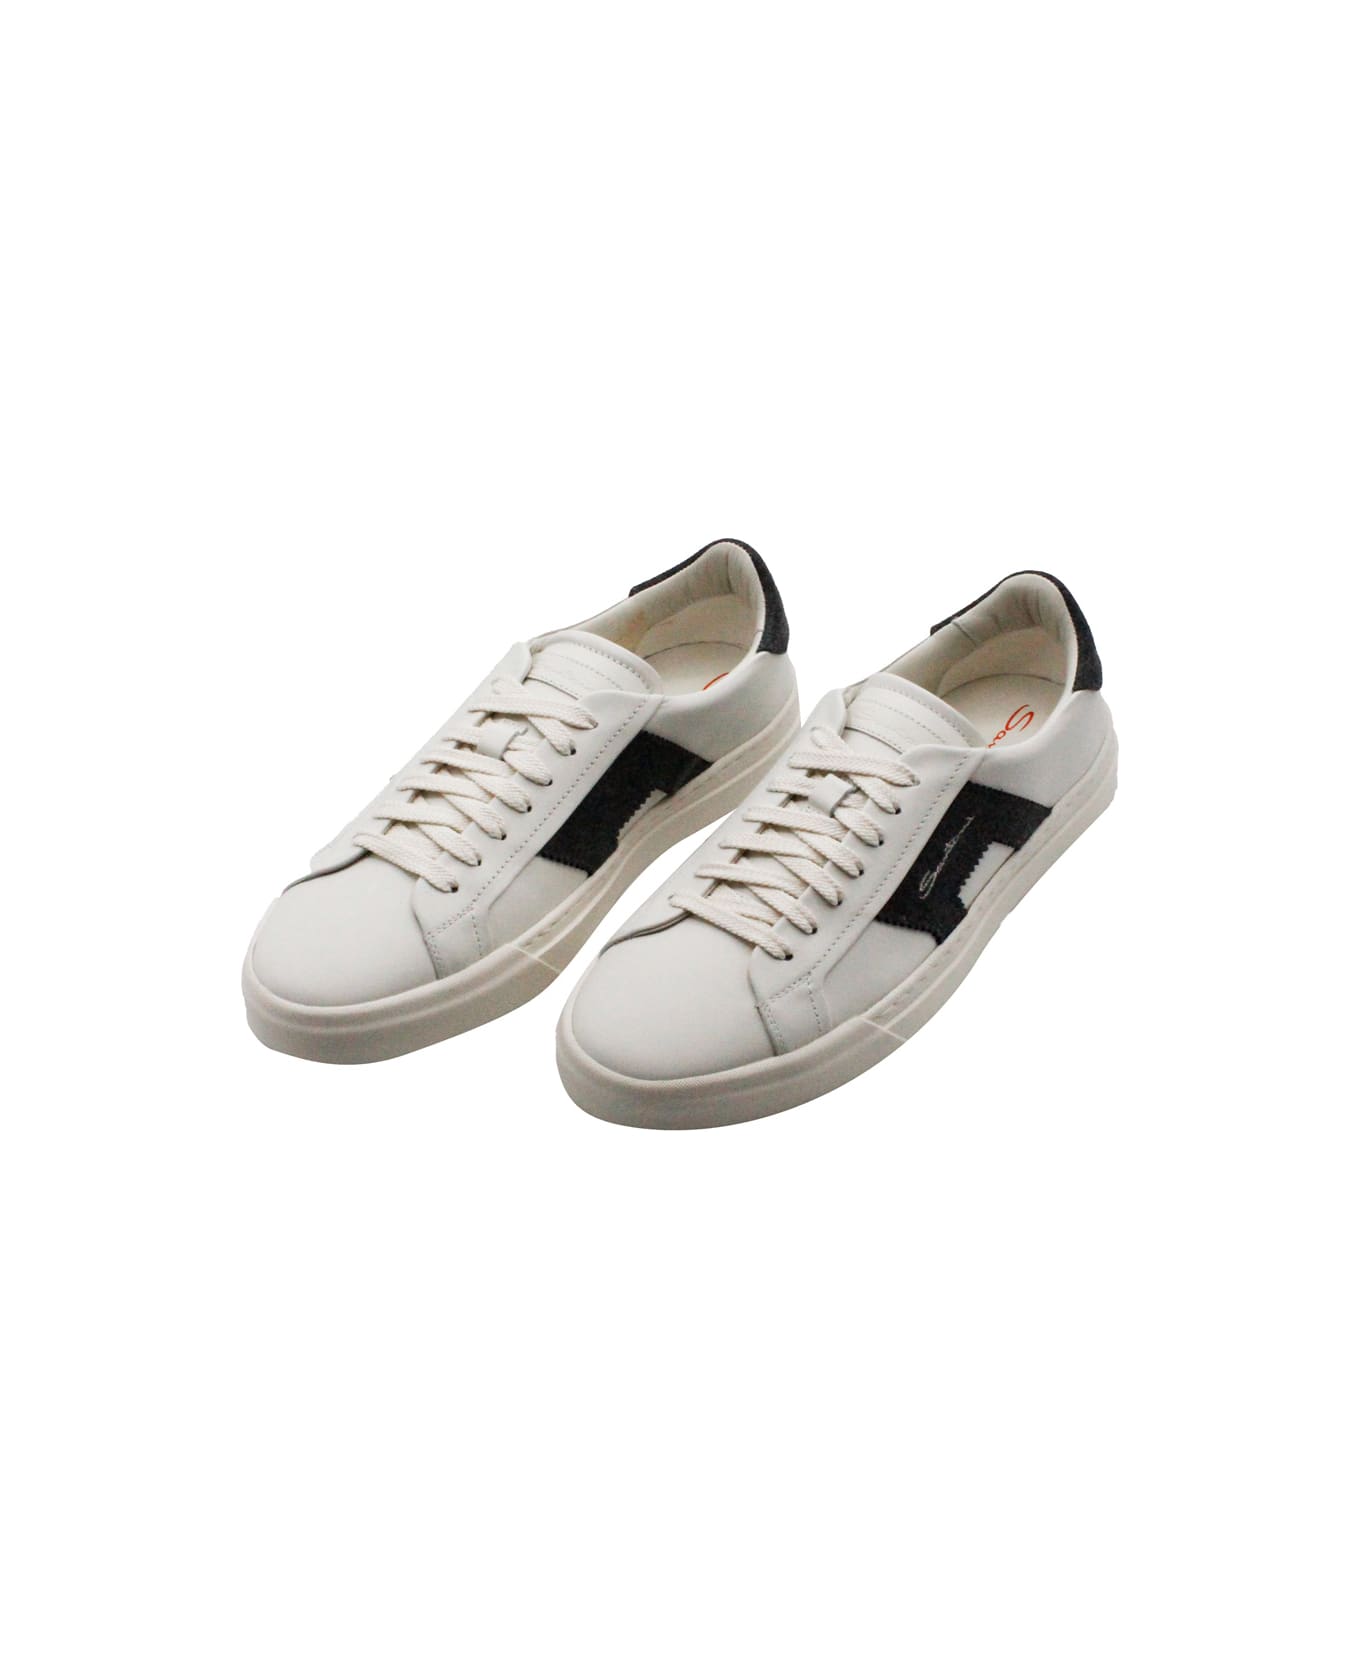 Santoni Sneaker In Soft Calfskin With Side And Back Inserts In Contrasting Color With Logo Lettering. Closing Laces - White